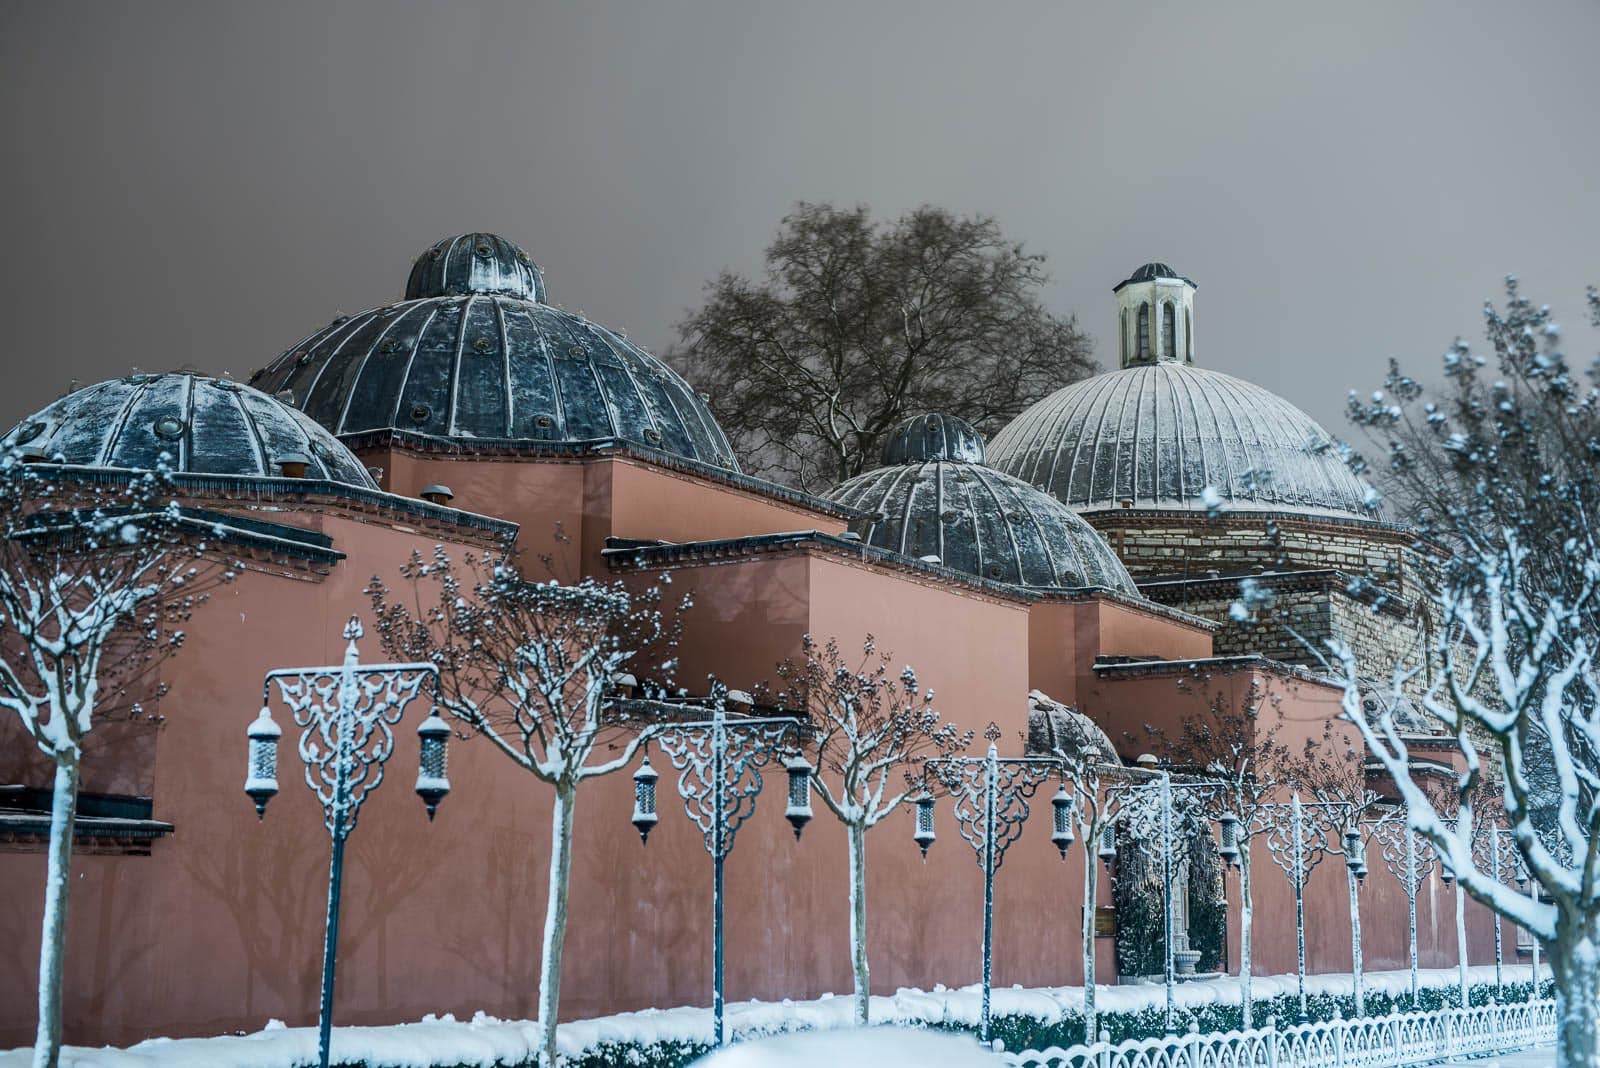 A snow covered building with domes in the background.